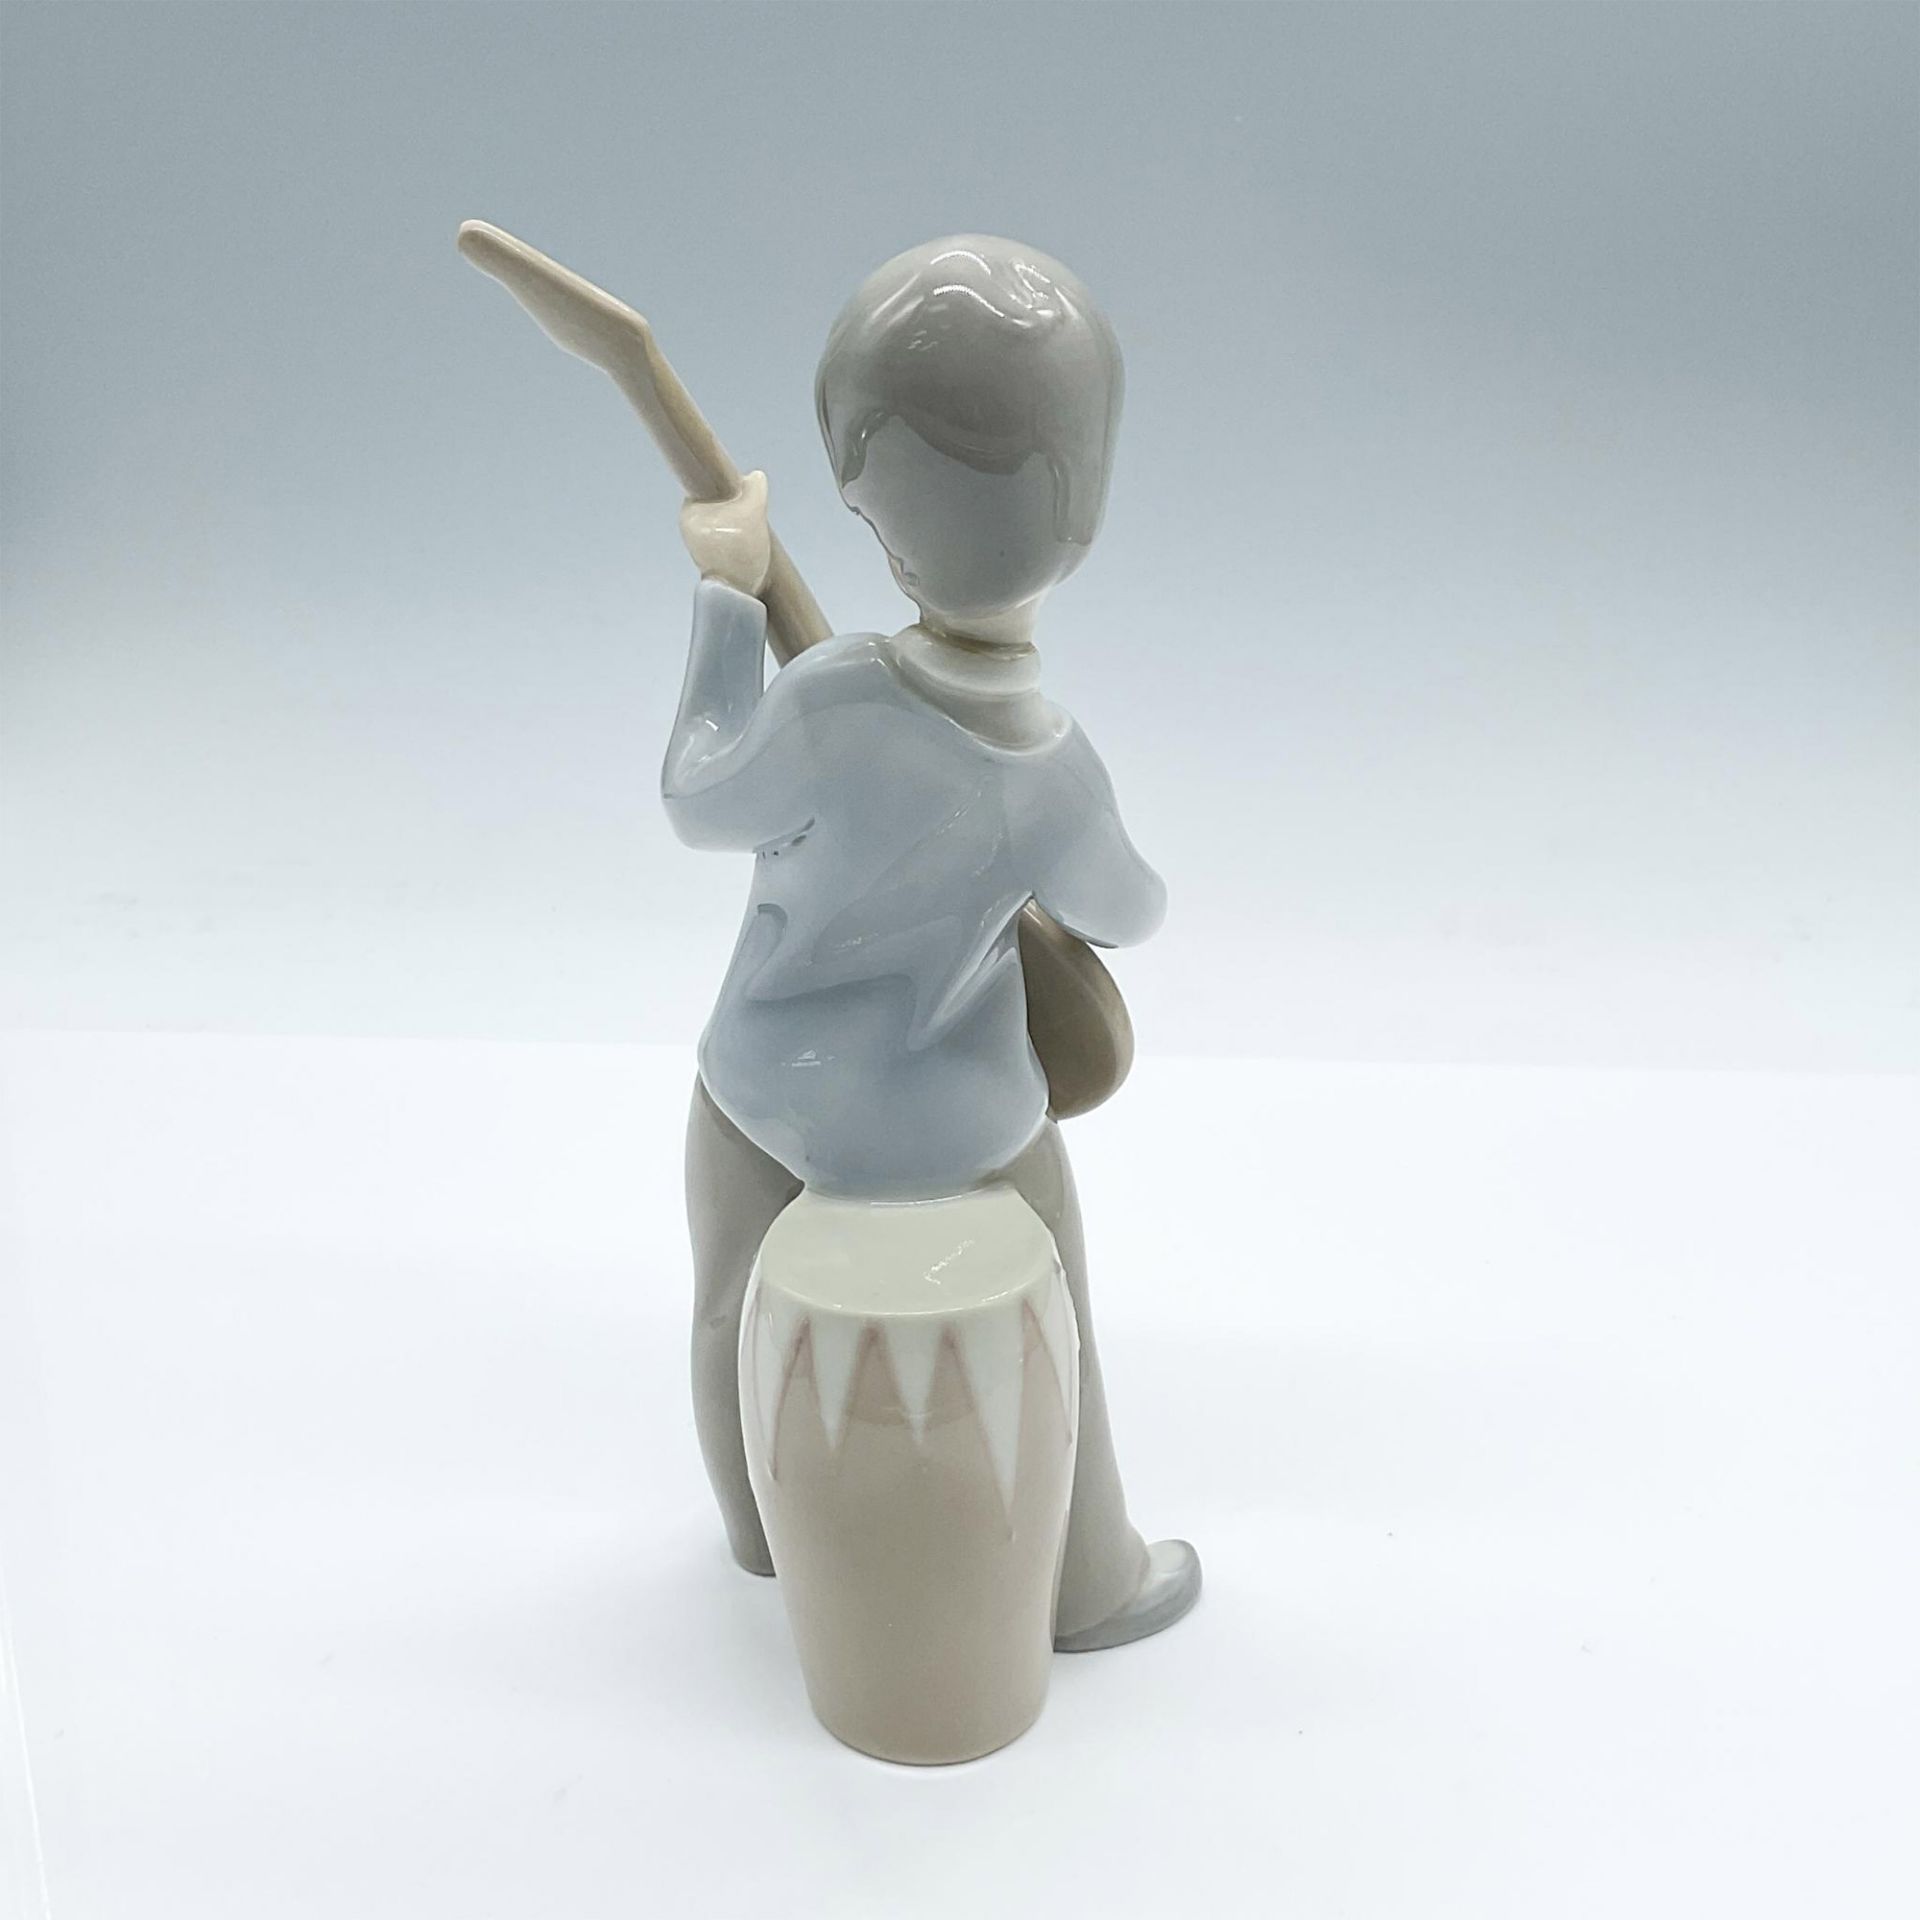 Lladro Porcelain Figurine, Boy with Guitar 1004614 - Image 2 of 3